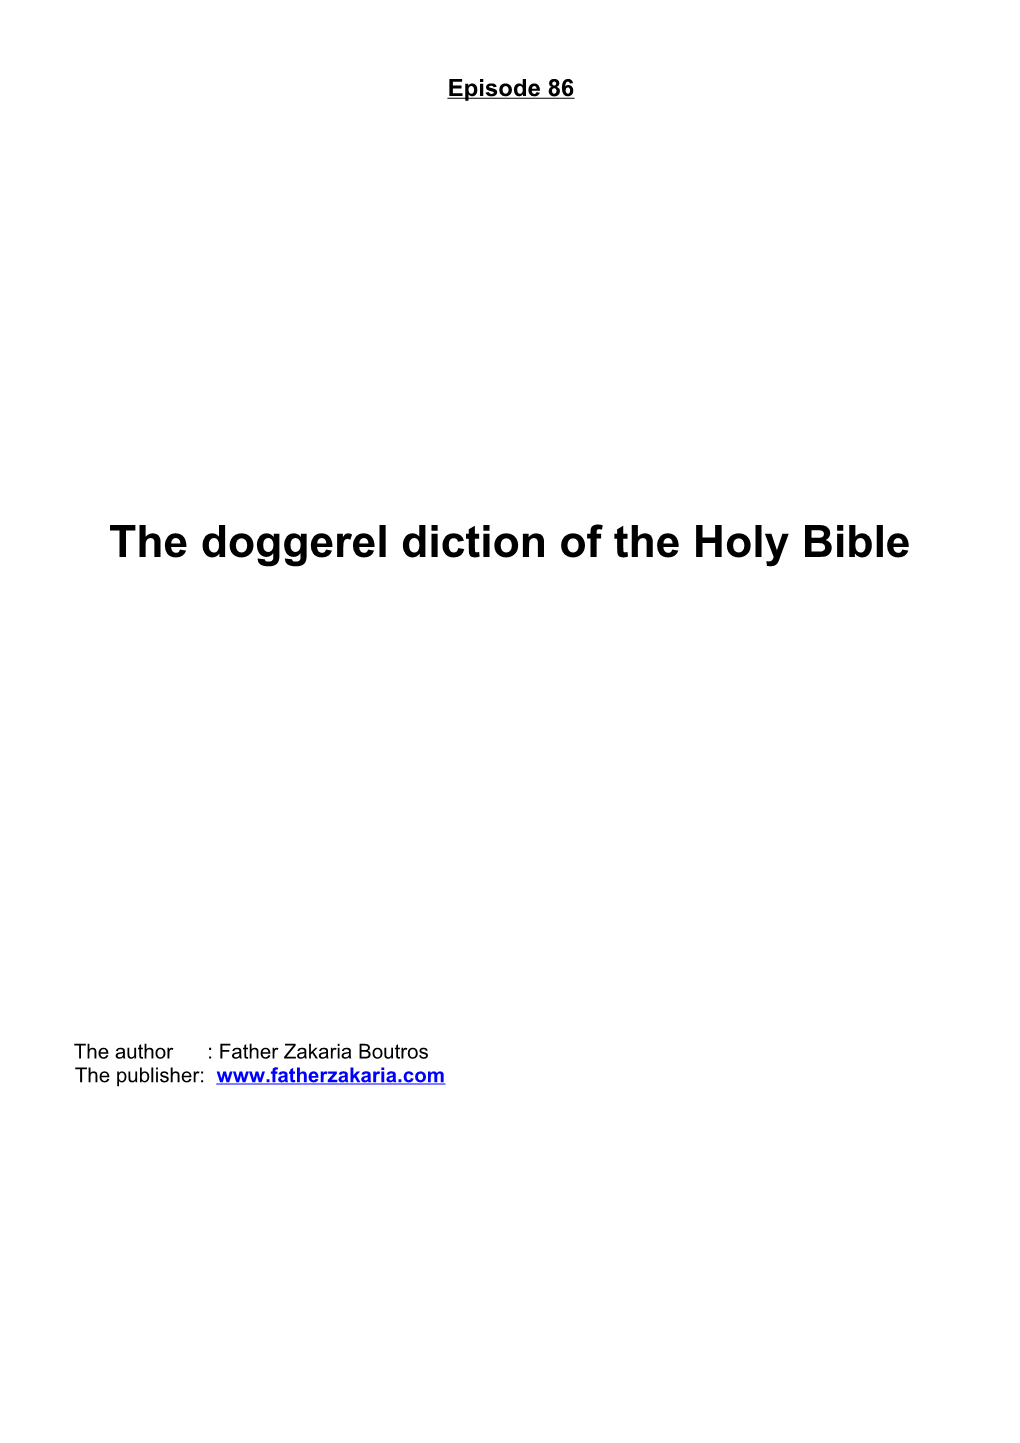 The Doggerel Diction of the Holy Bible